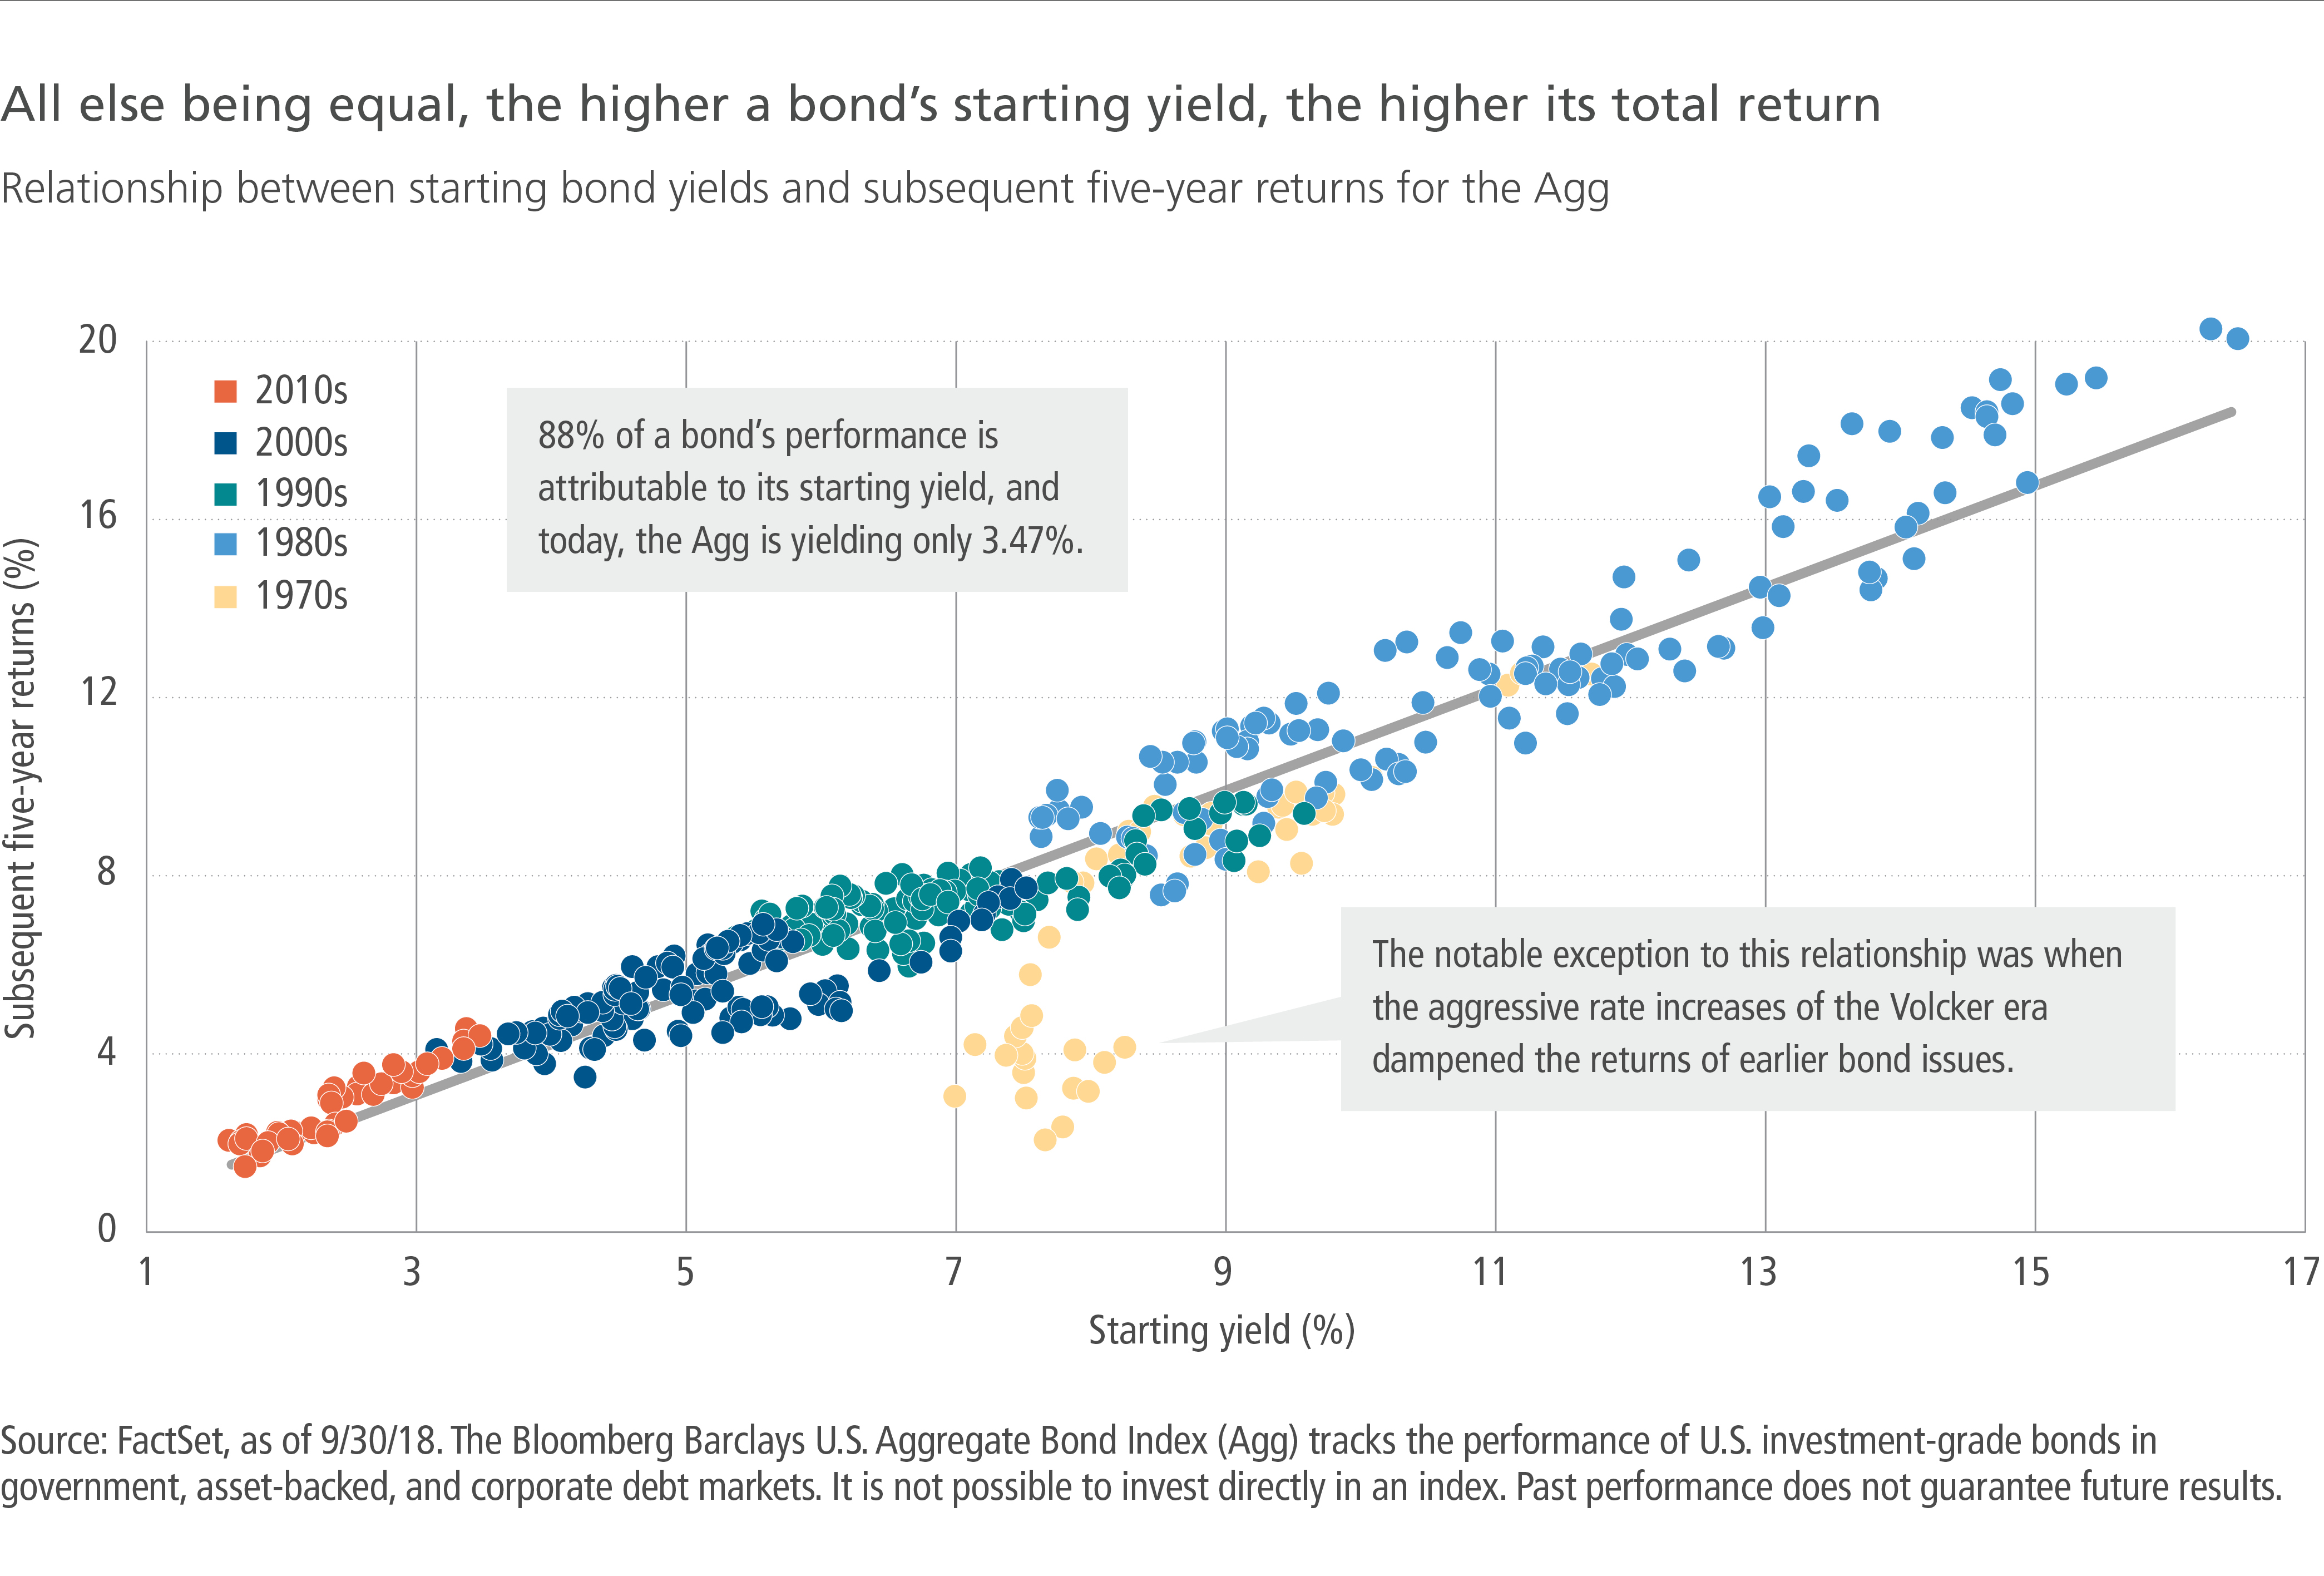 All else being equal, the higher a bond's starting yield, the higher its total return